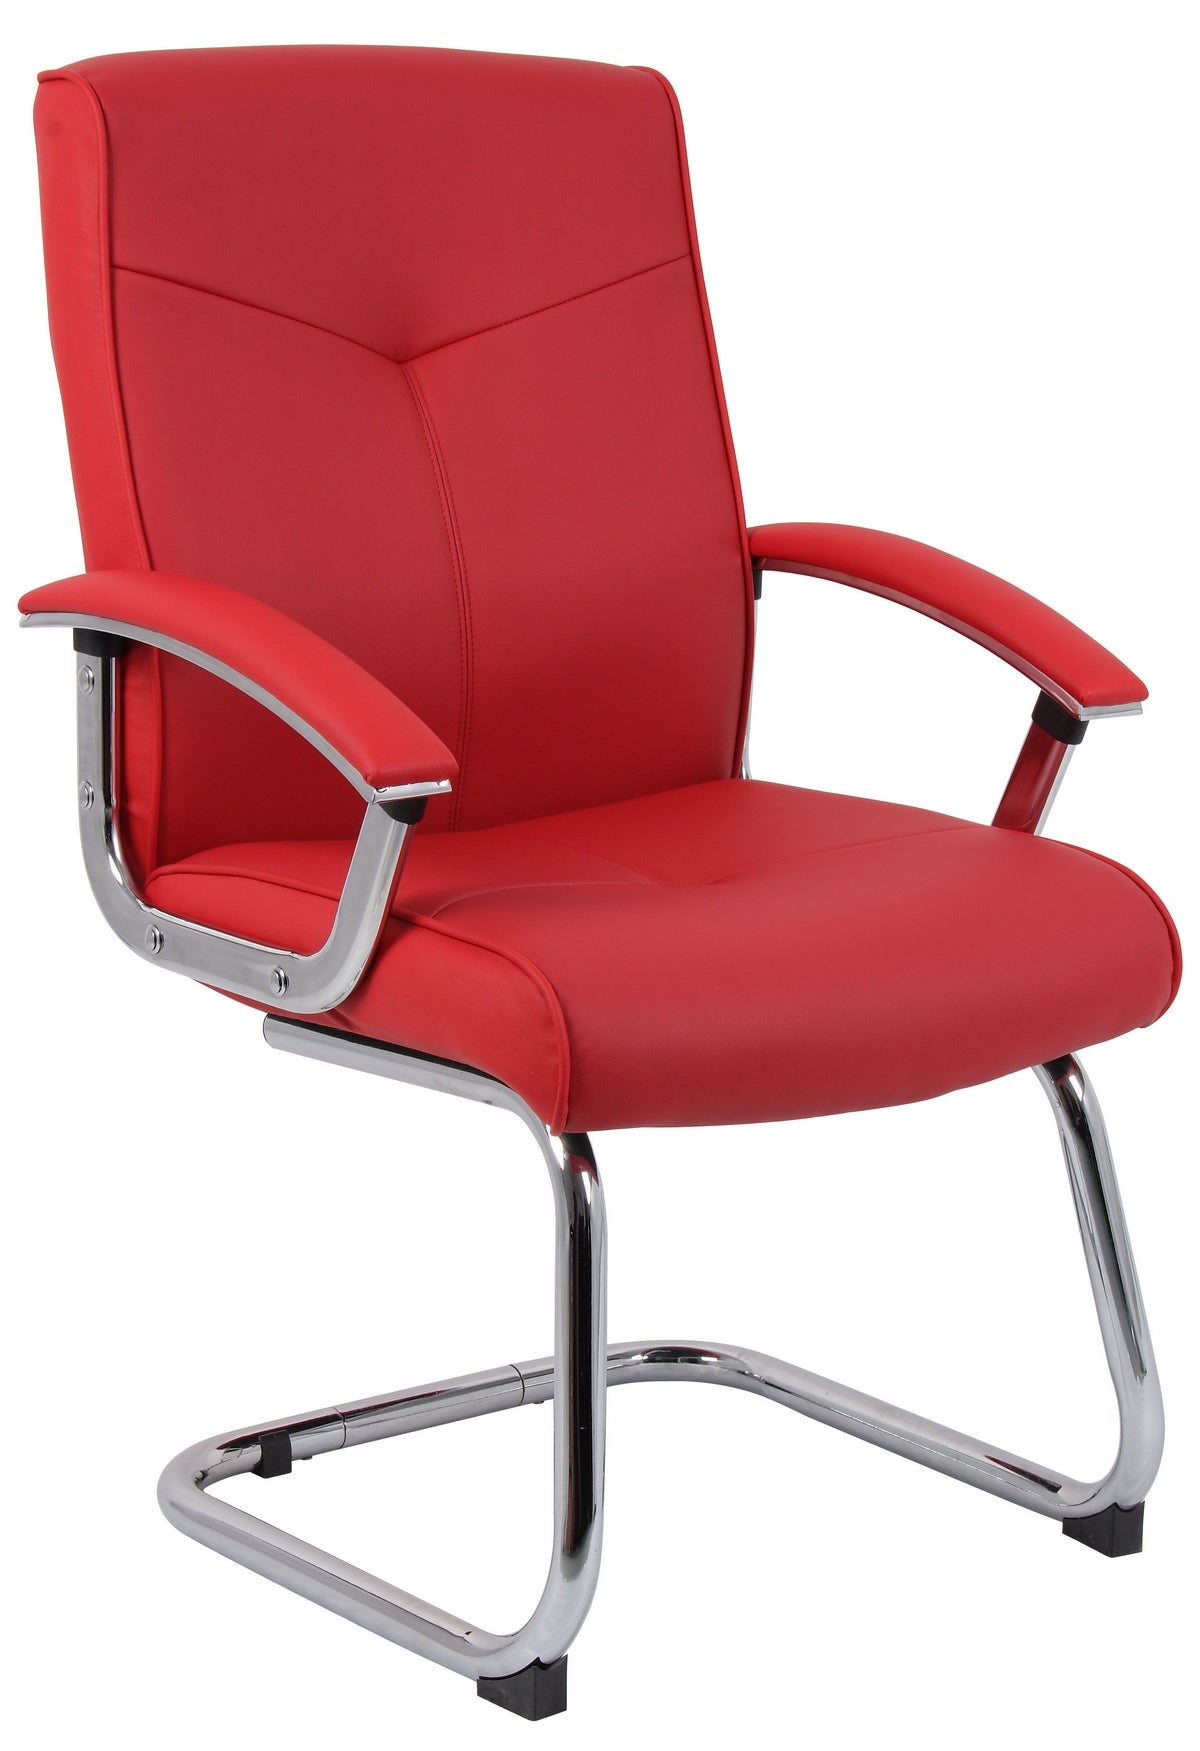 Red Leather Faced Visitor Chair - HOXTON-VISITOR UK